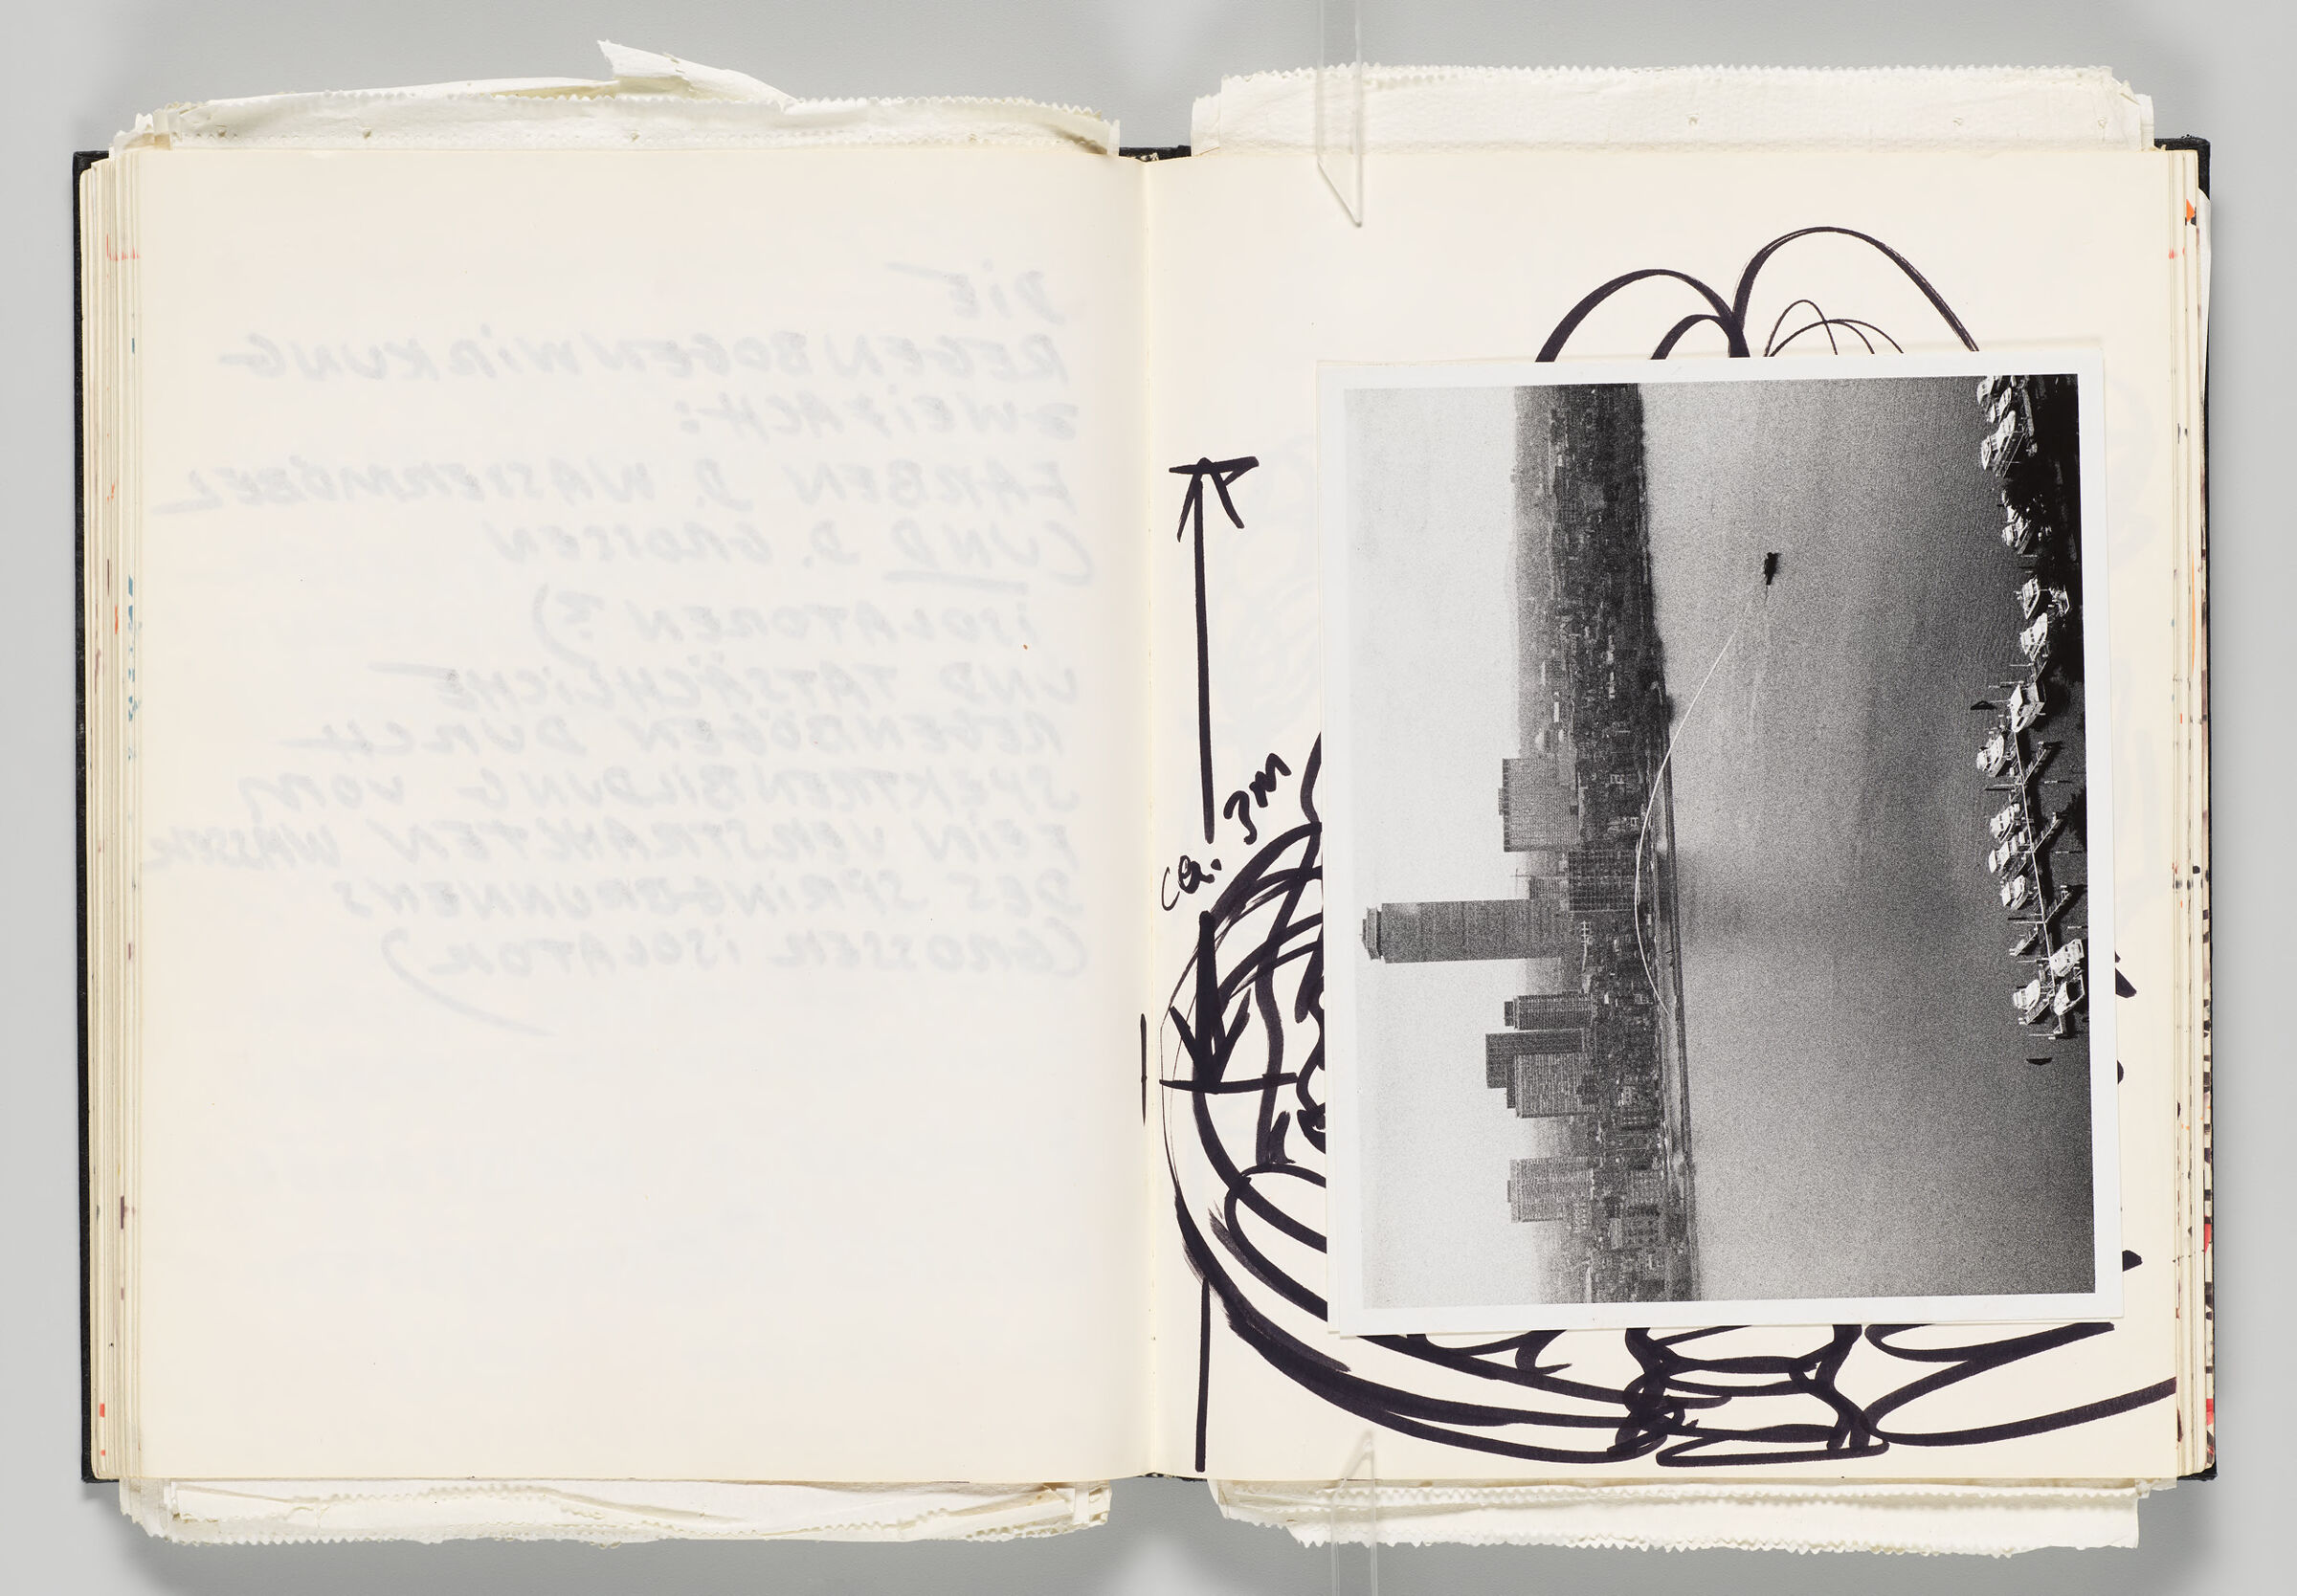 Untitled (Bleed-Through Of Previous Page, Left Page); Untitled (Fountain Design, Right Page)